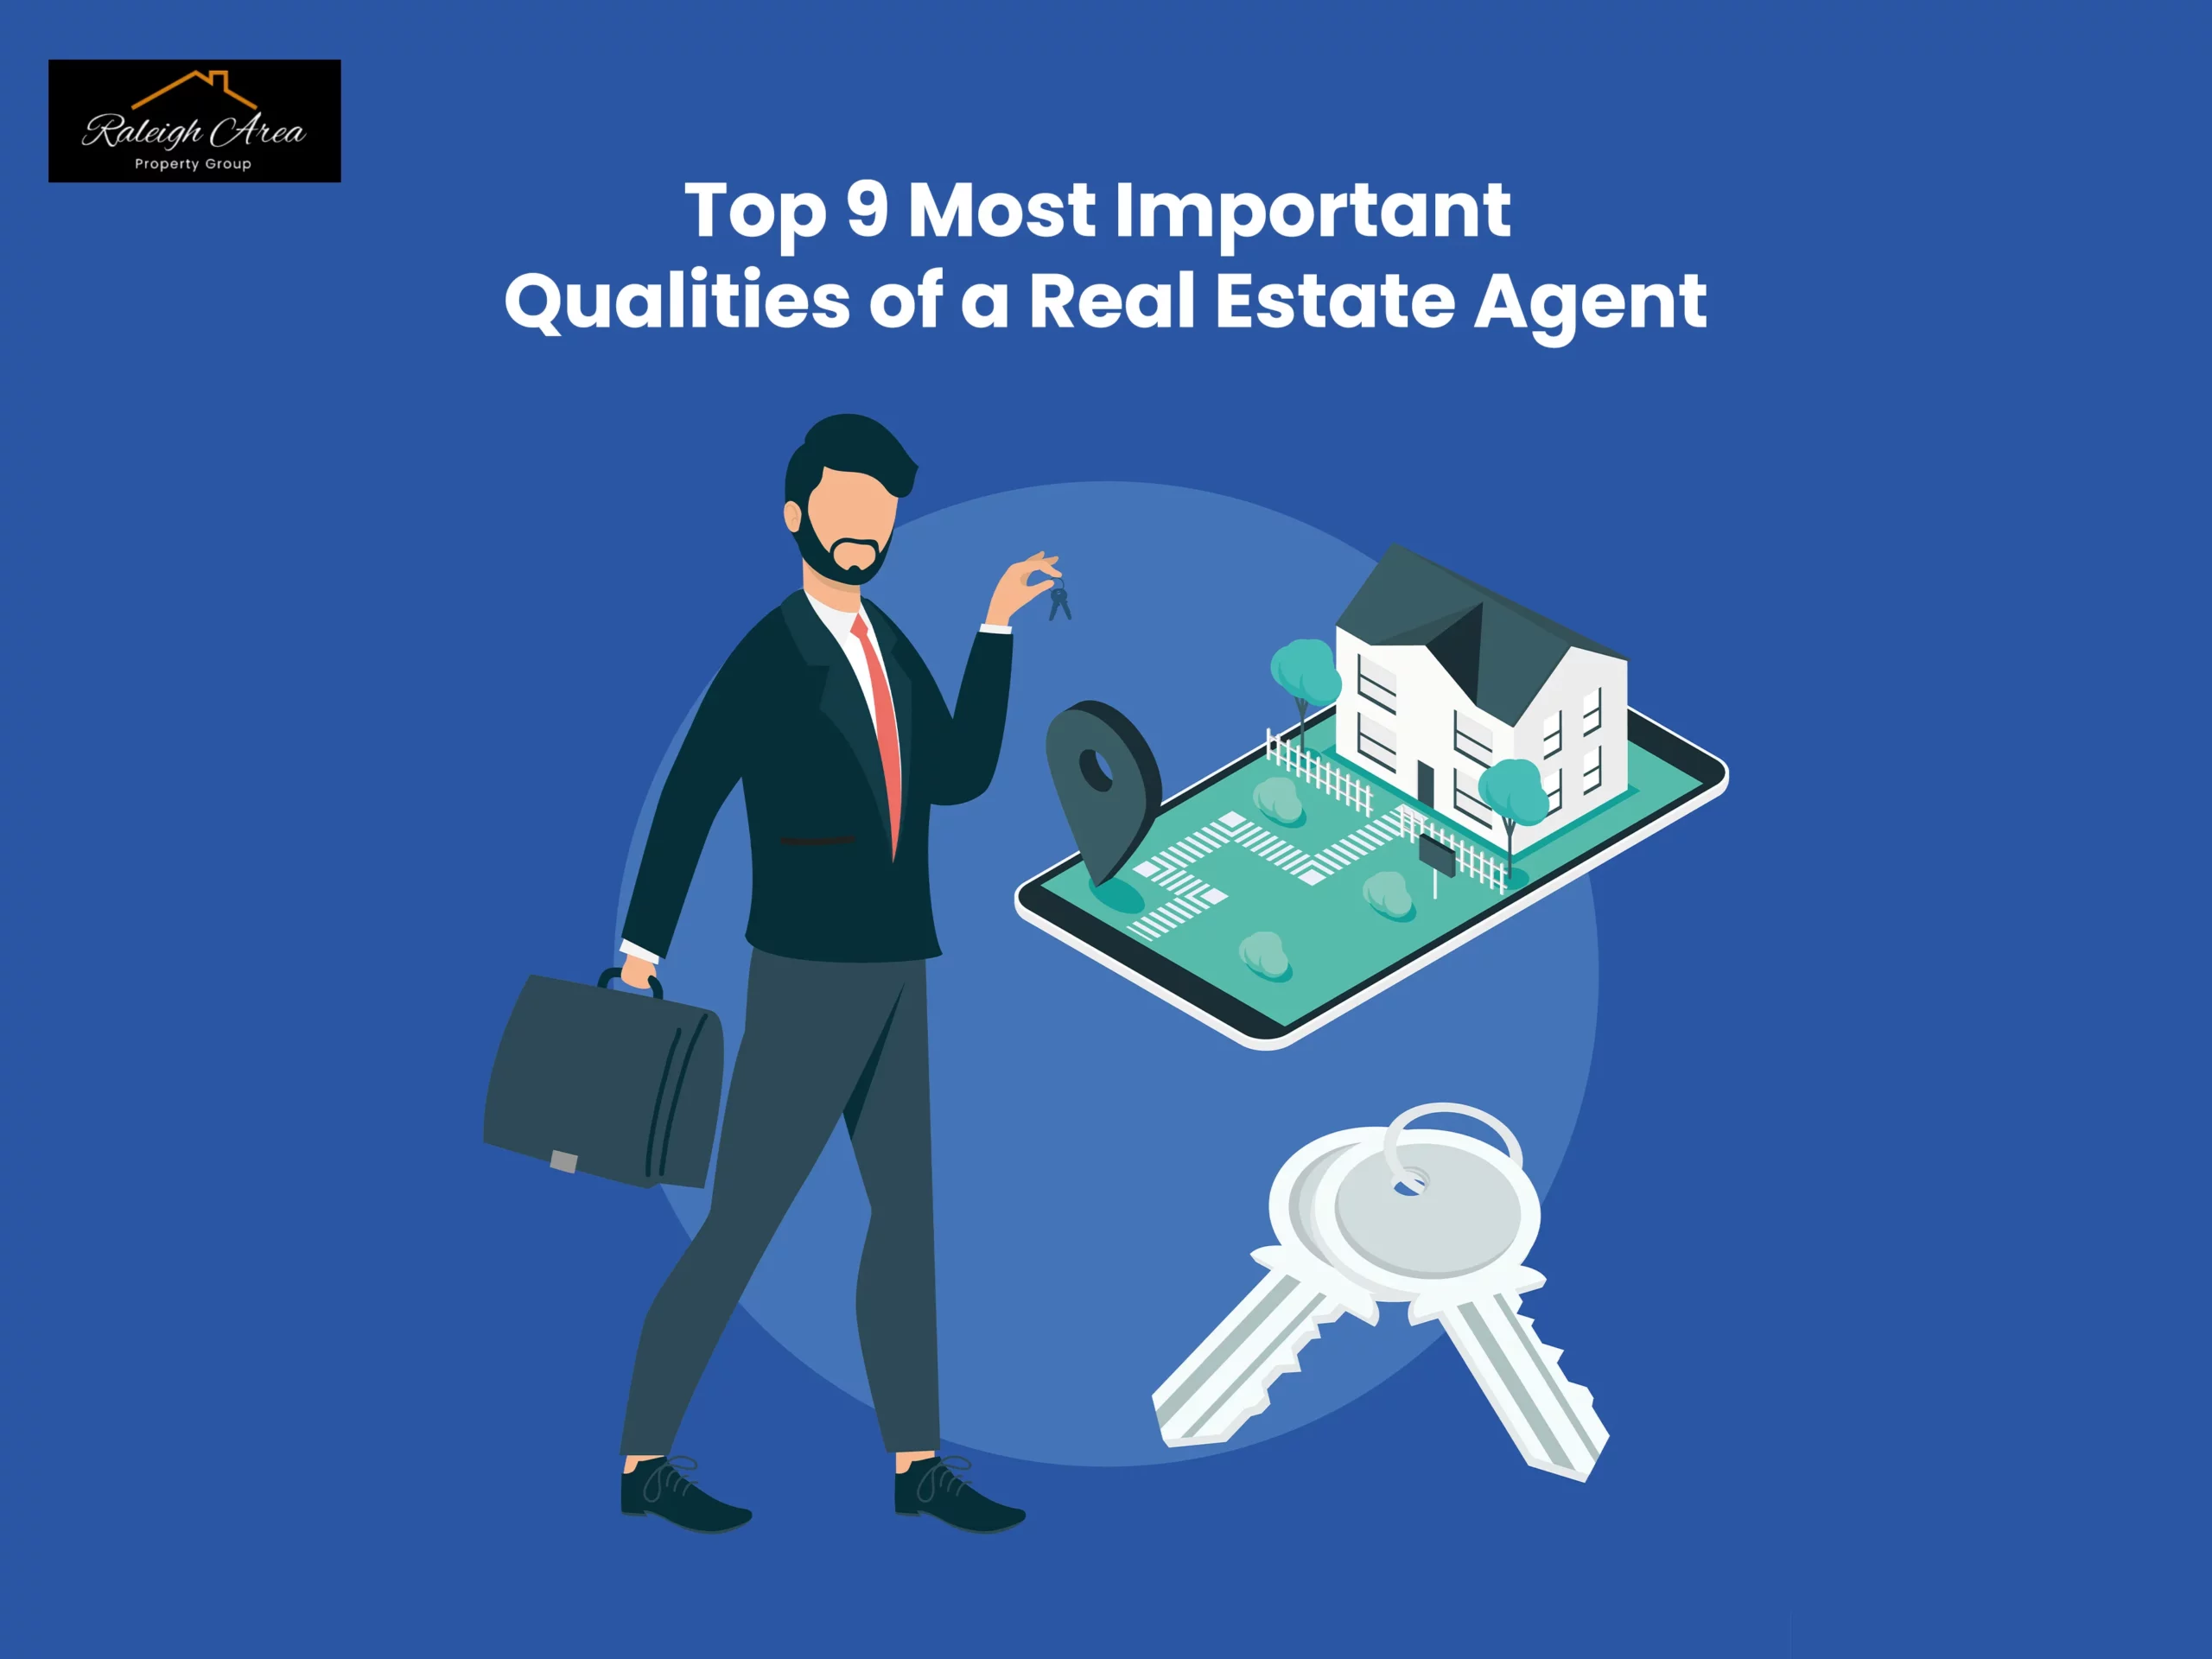 Top 9 Most Important Qualities of a Real Estate Agent